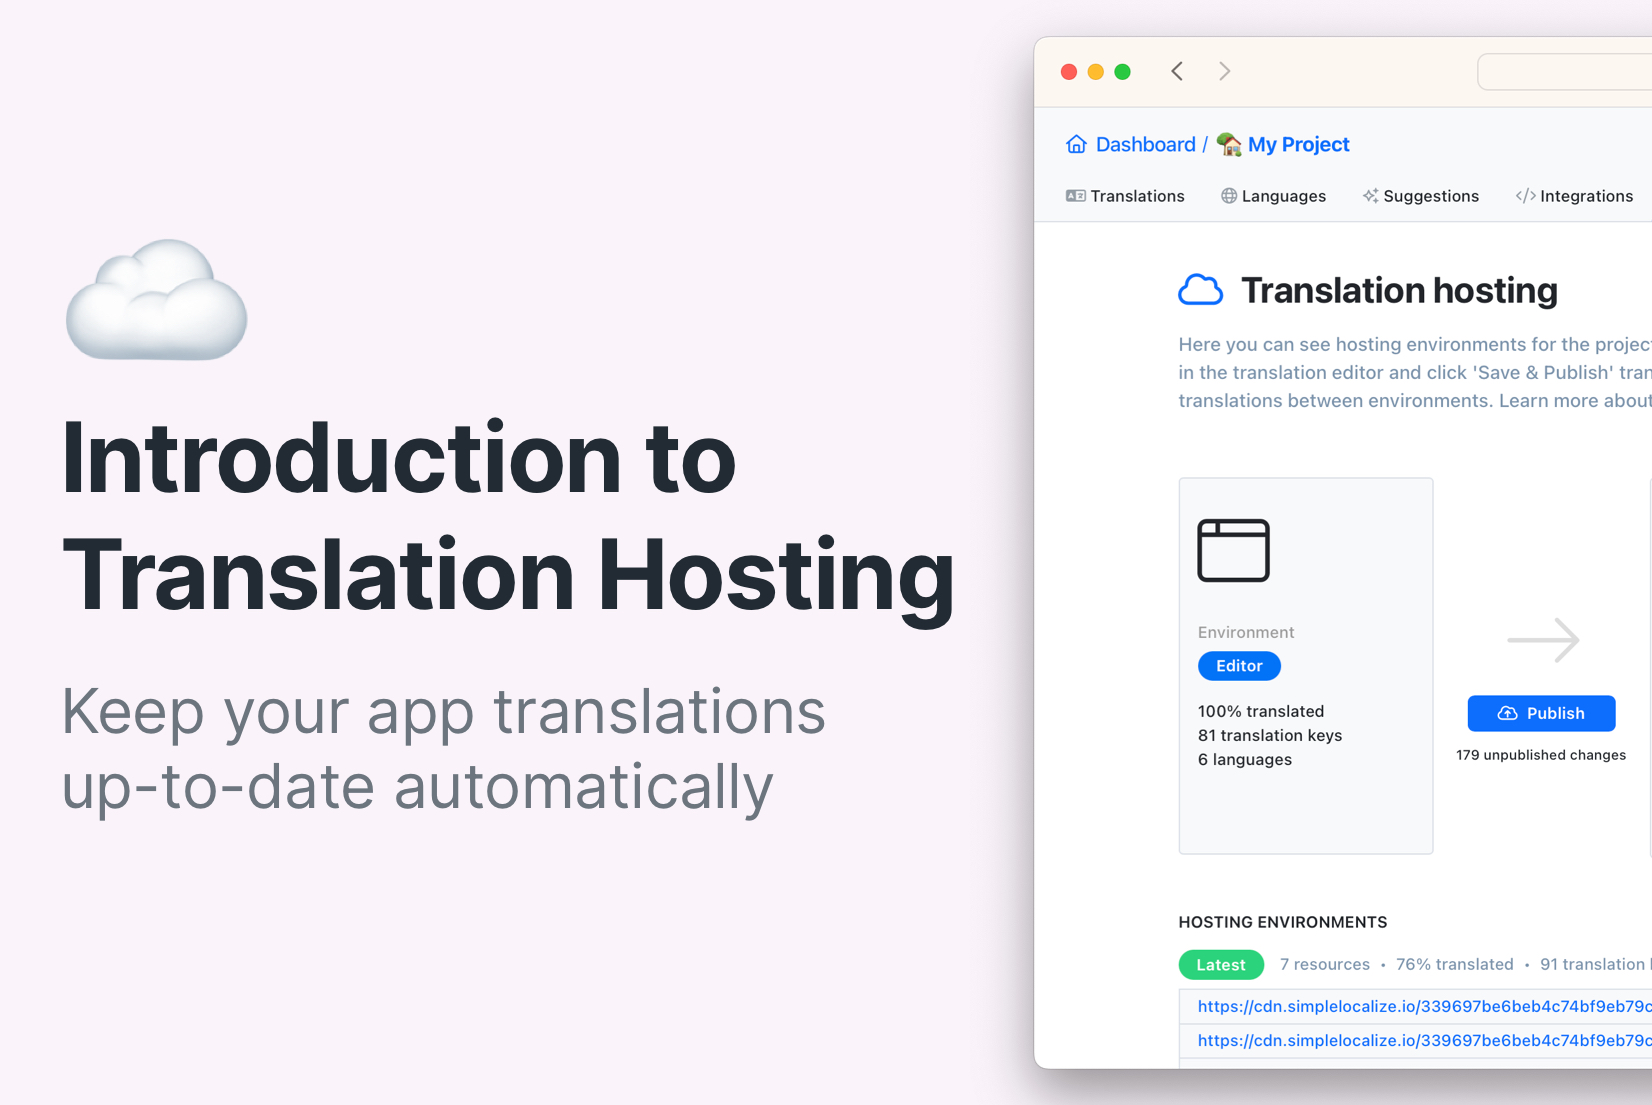 Translation Hosting: How to update translations automatically?